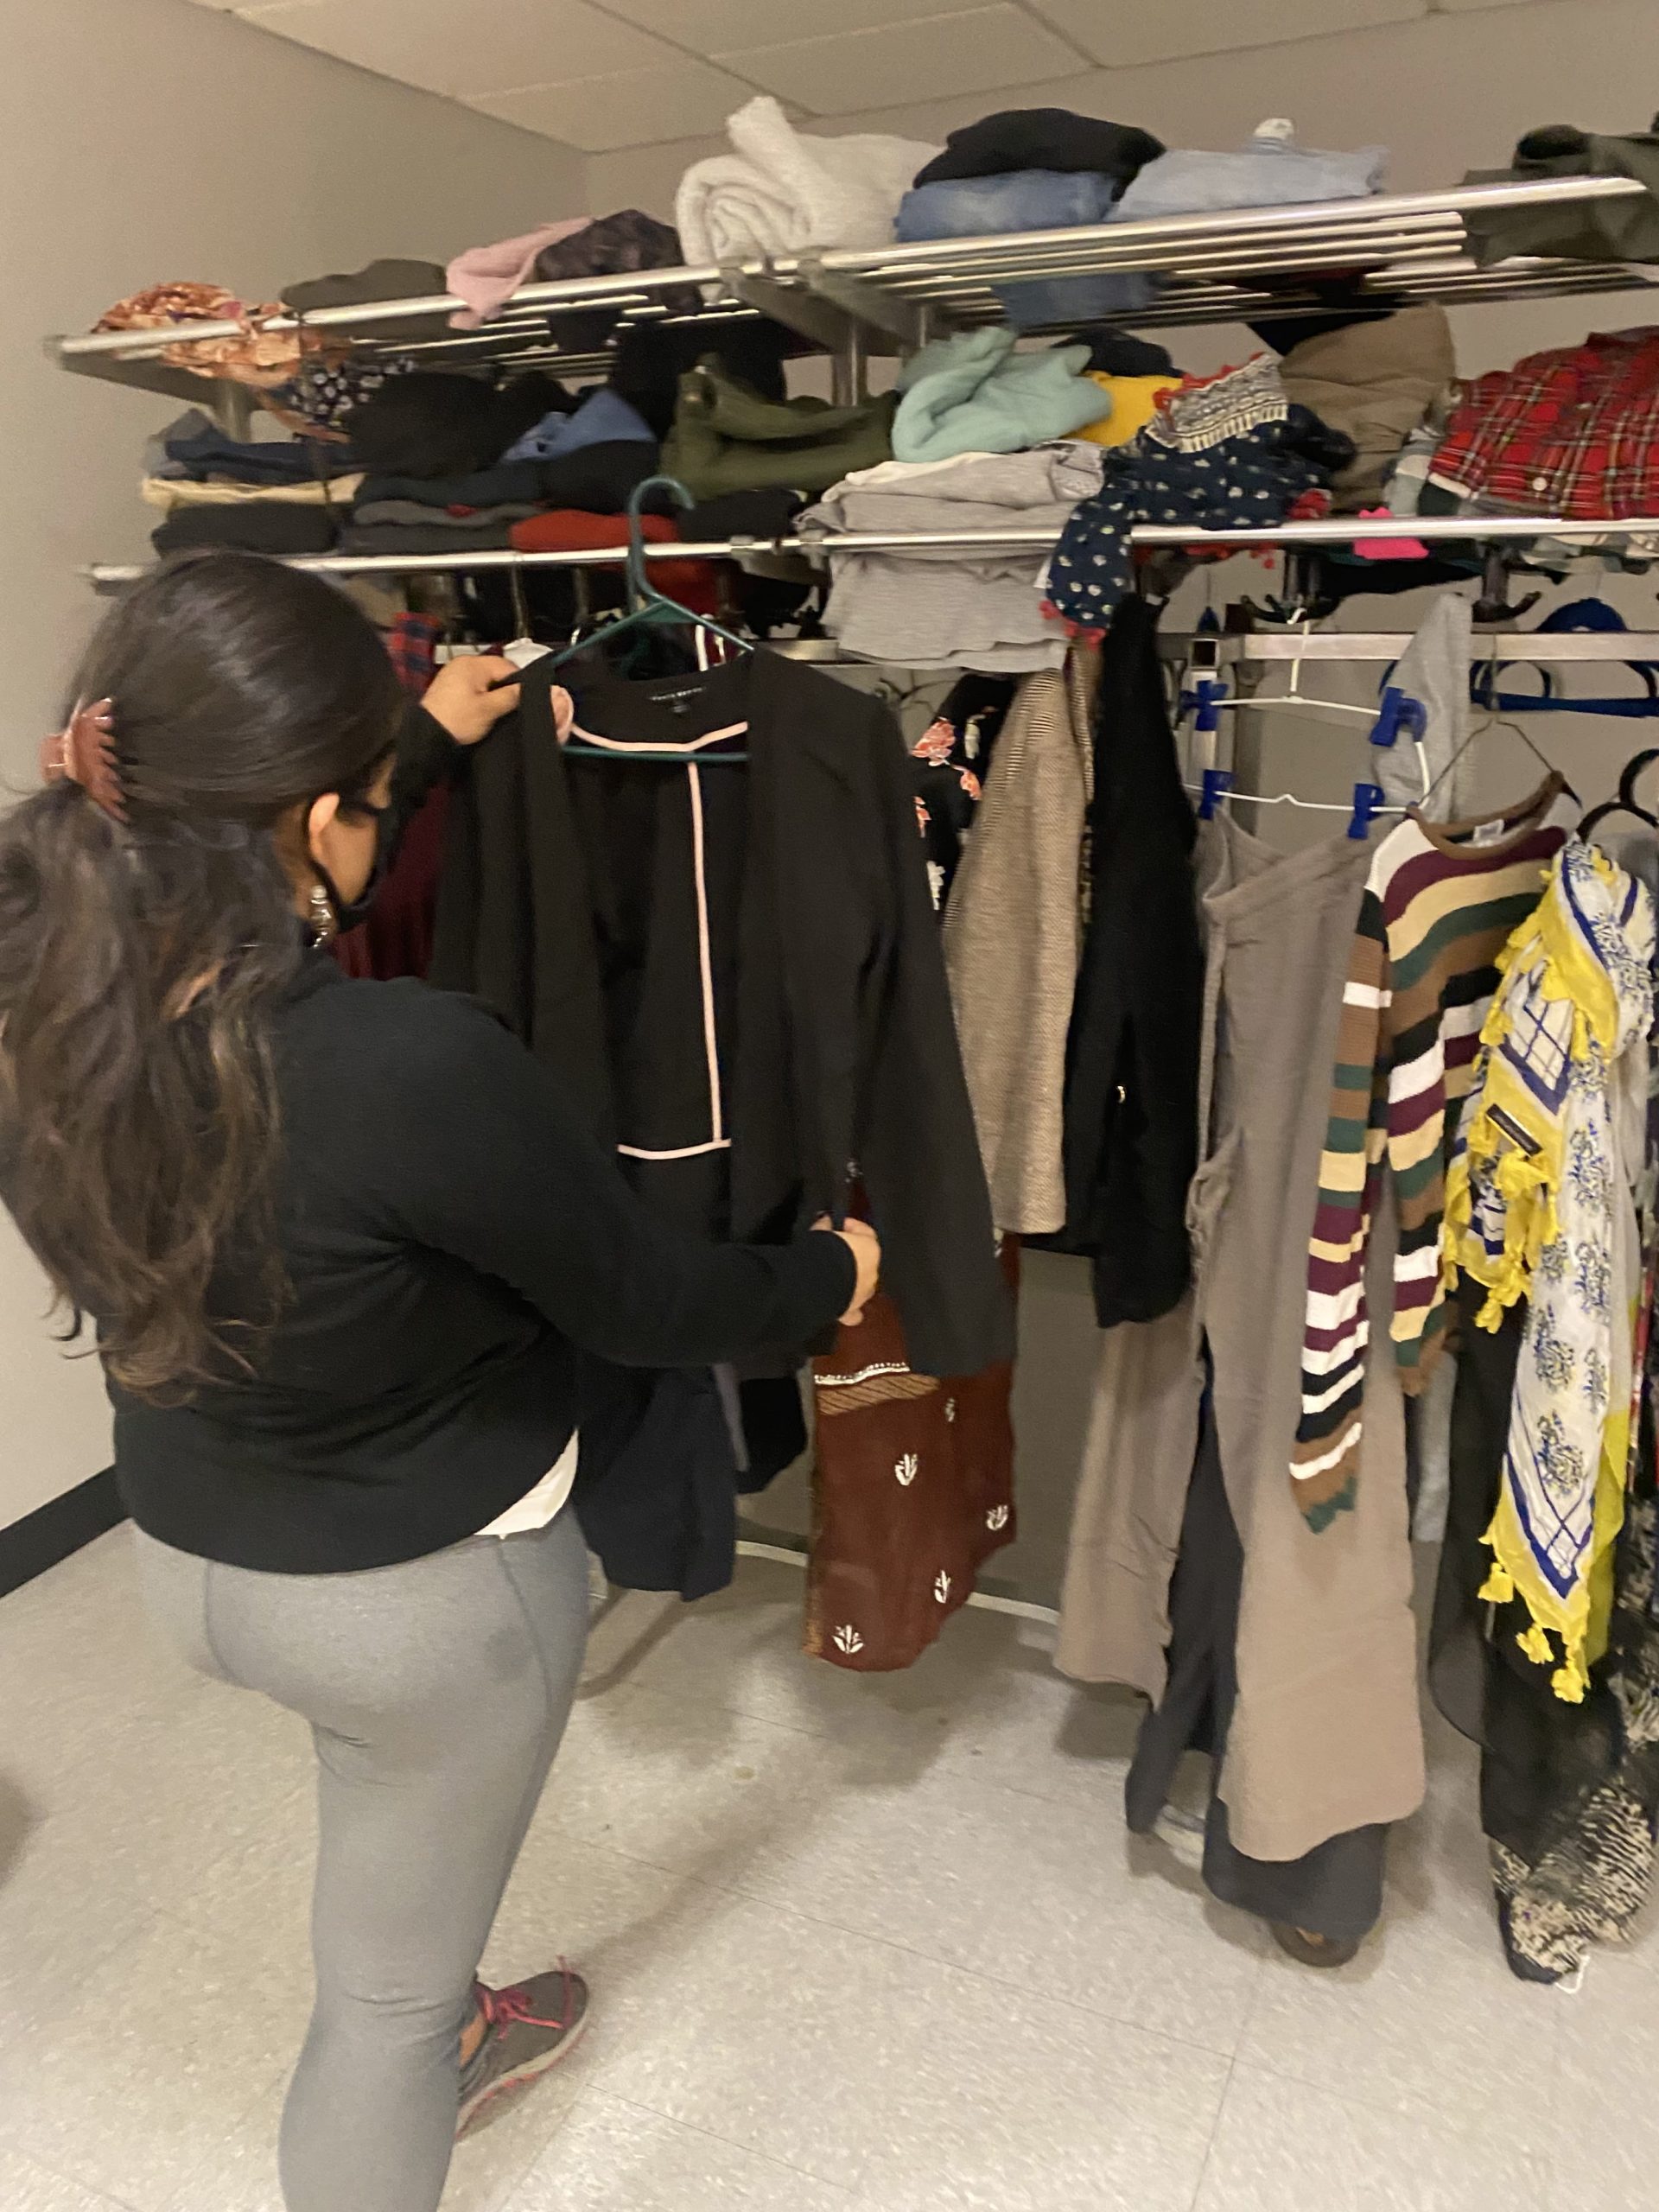 A clothing swap participant examines an item in front of a rack of clothing